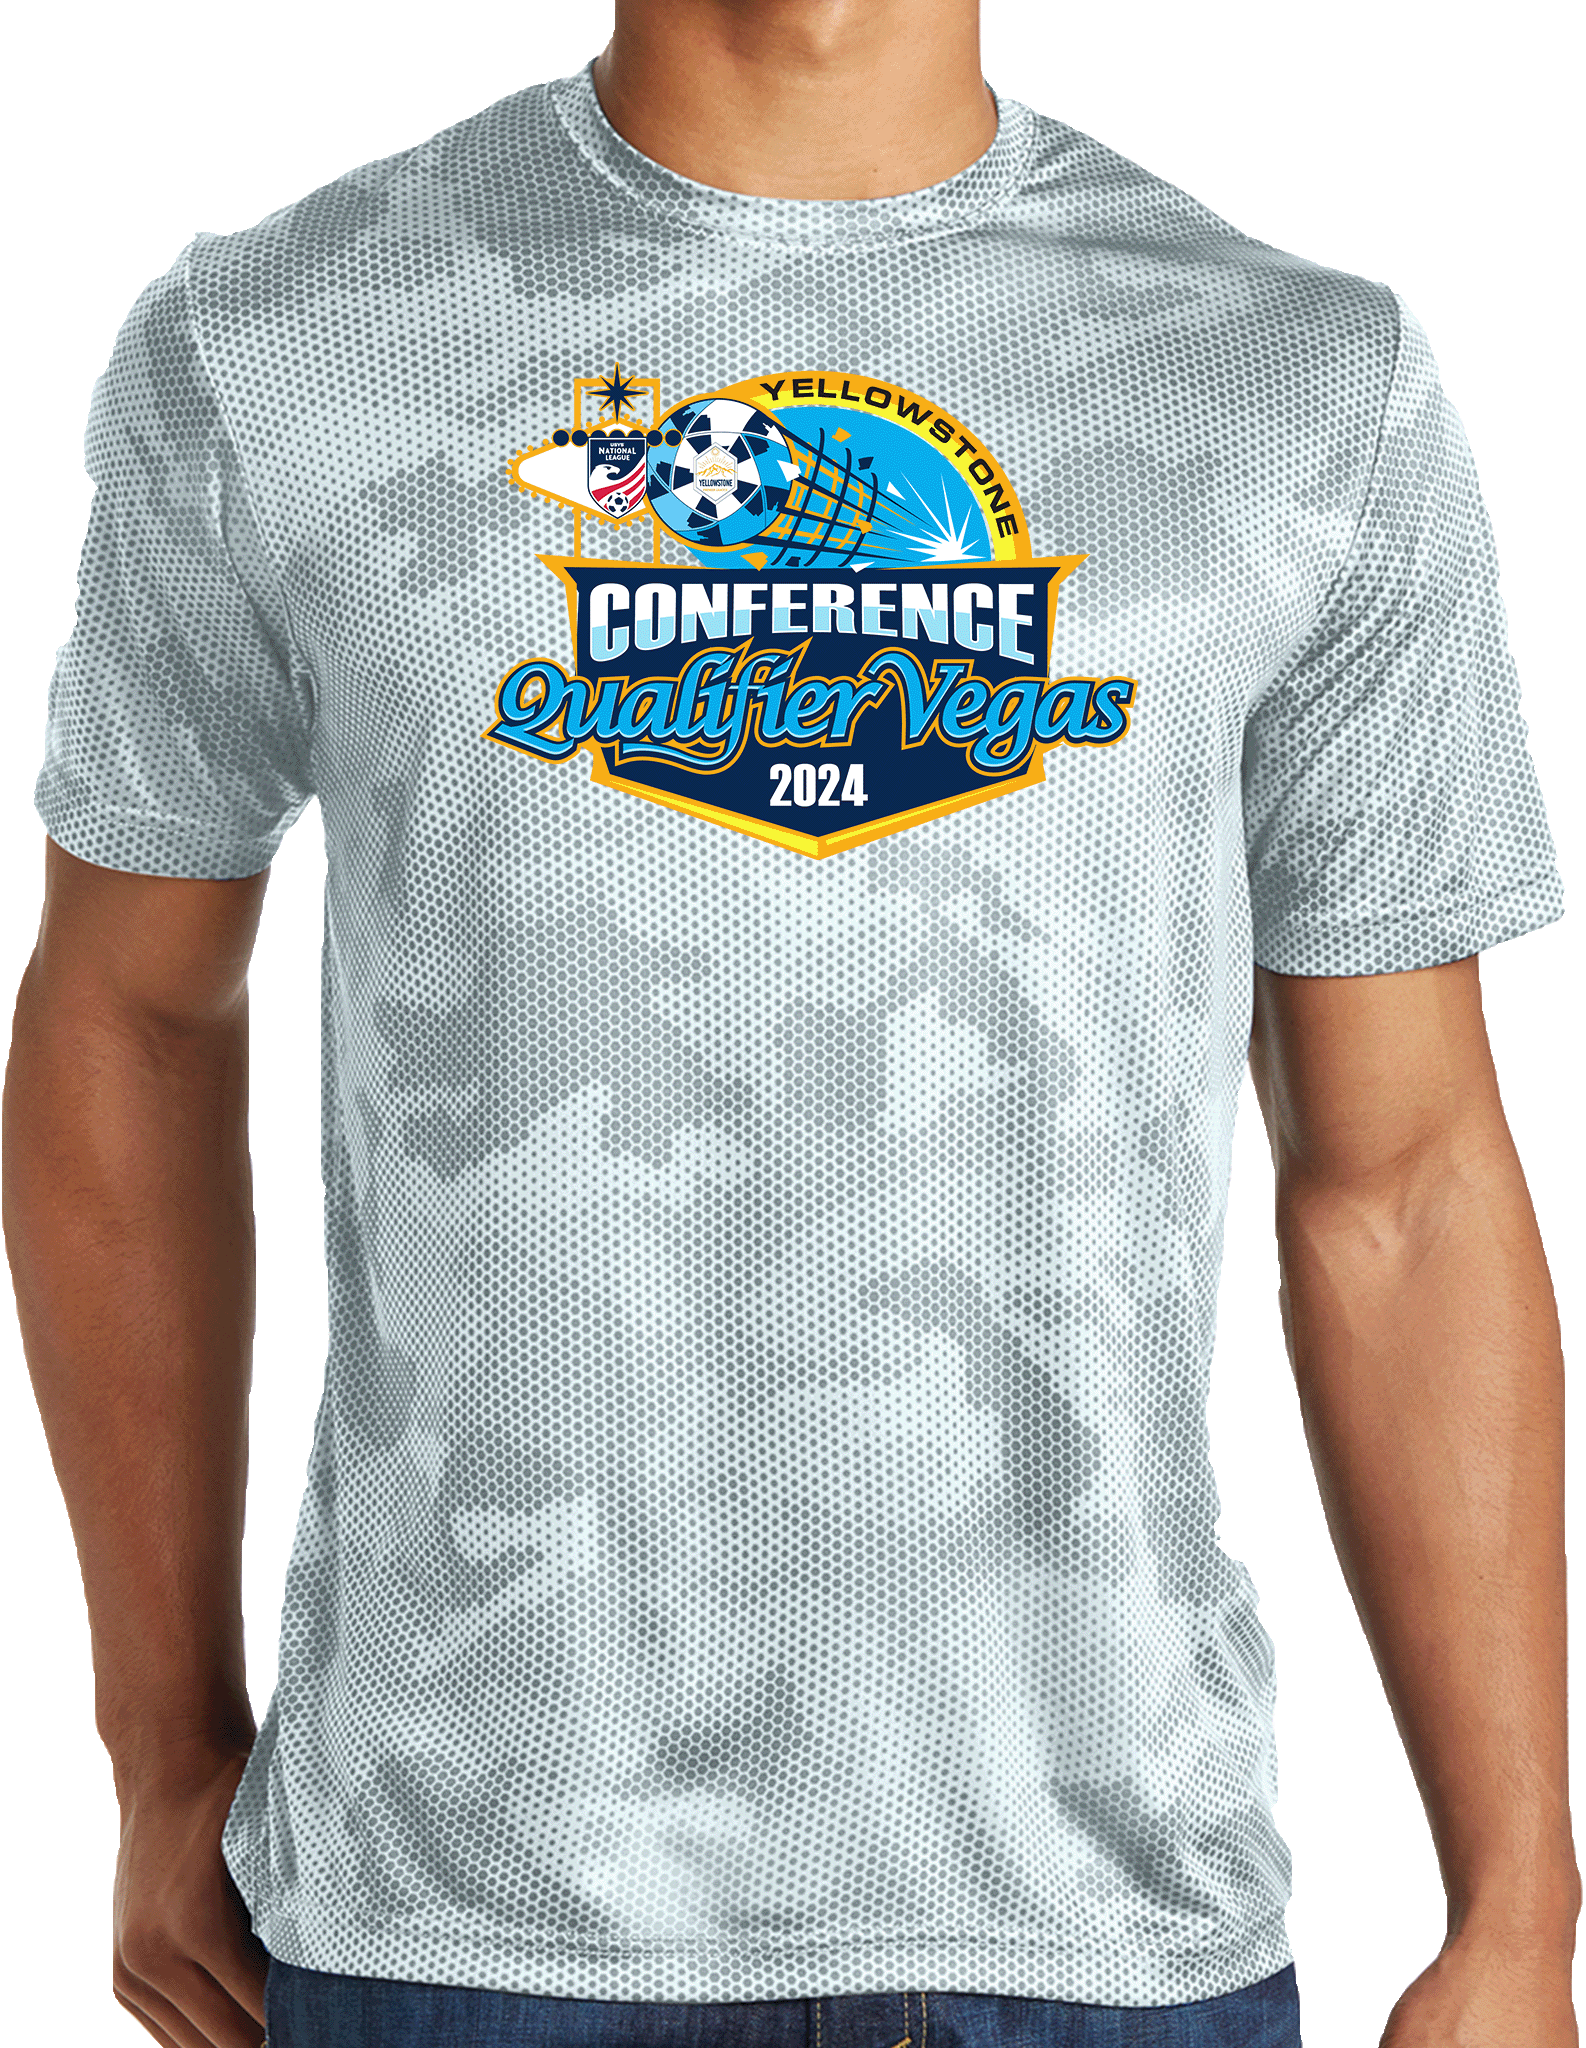 Performance Shirts - 2024 Yellowstone Conference Qualifier Vegas